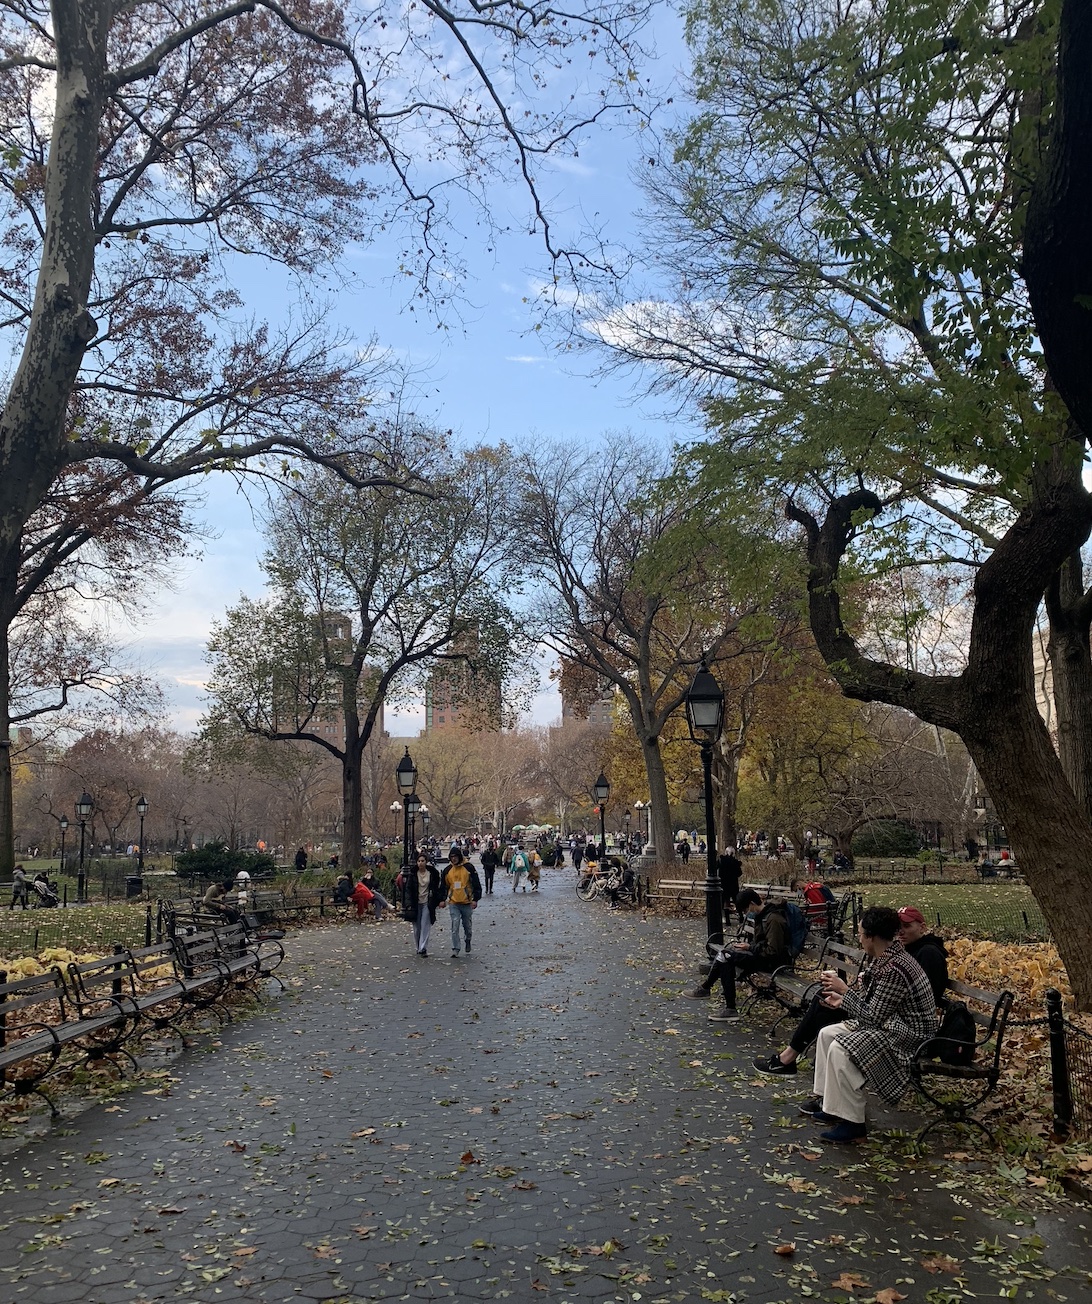 A walkway in Washington Square Park with benches and trees on either side.